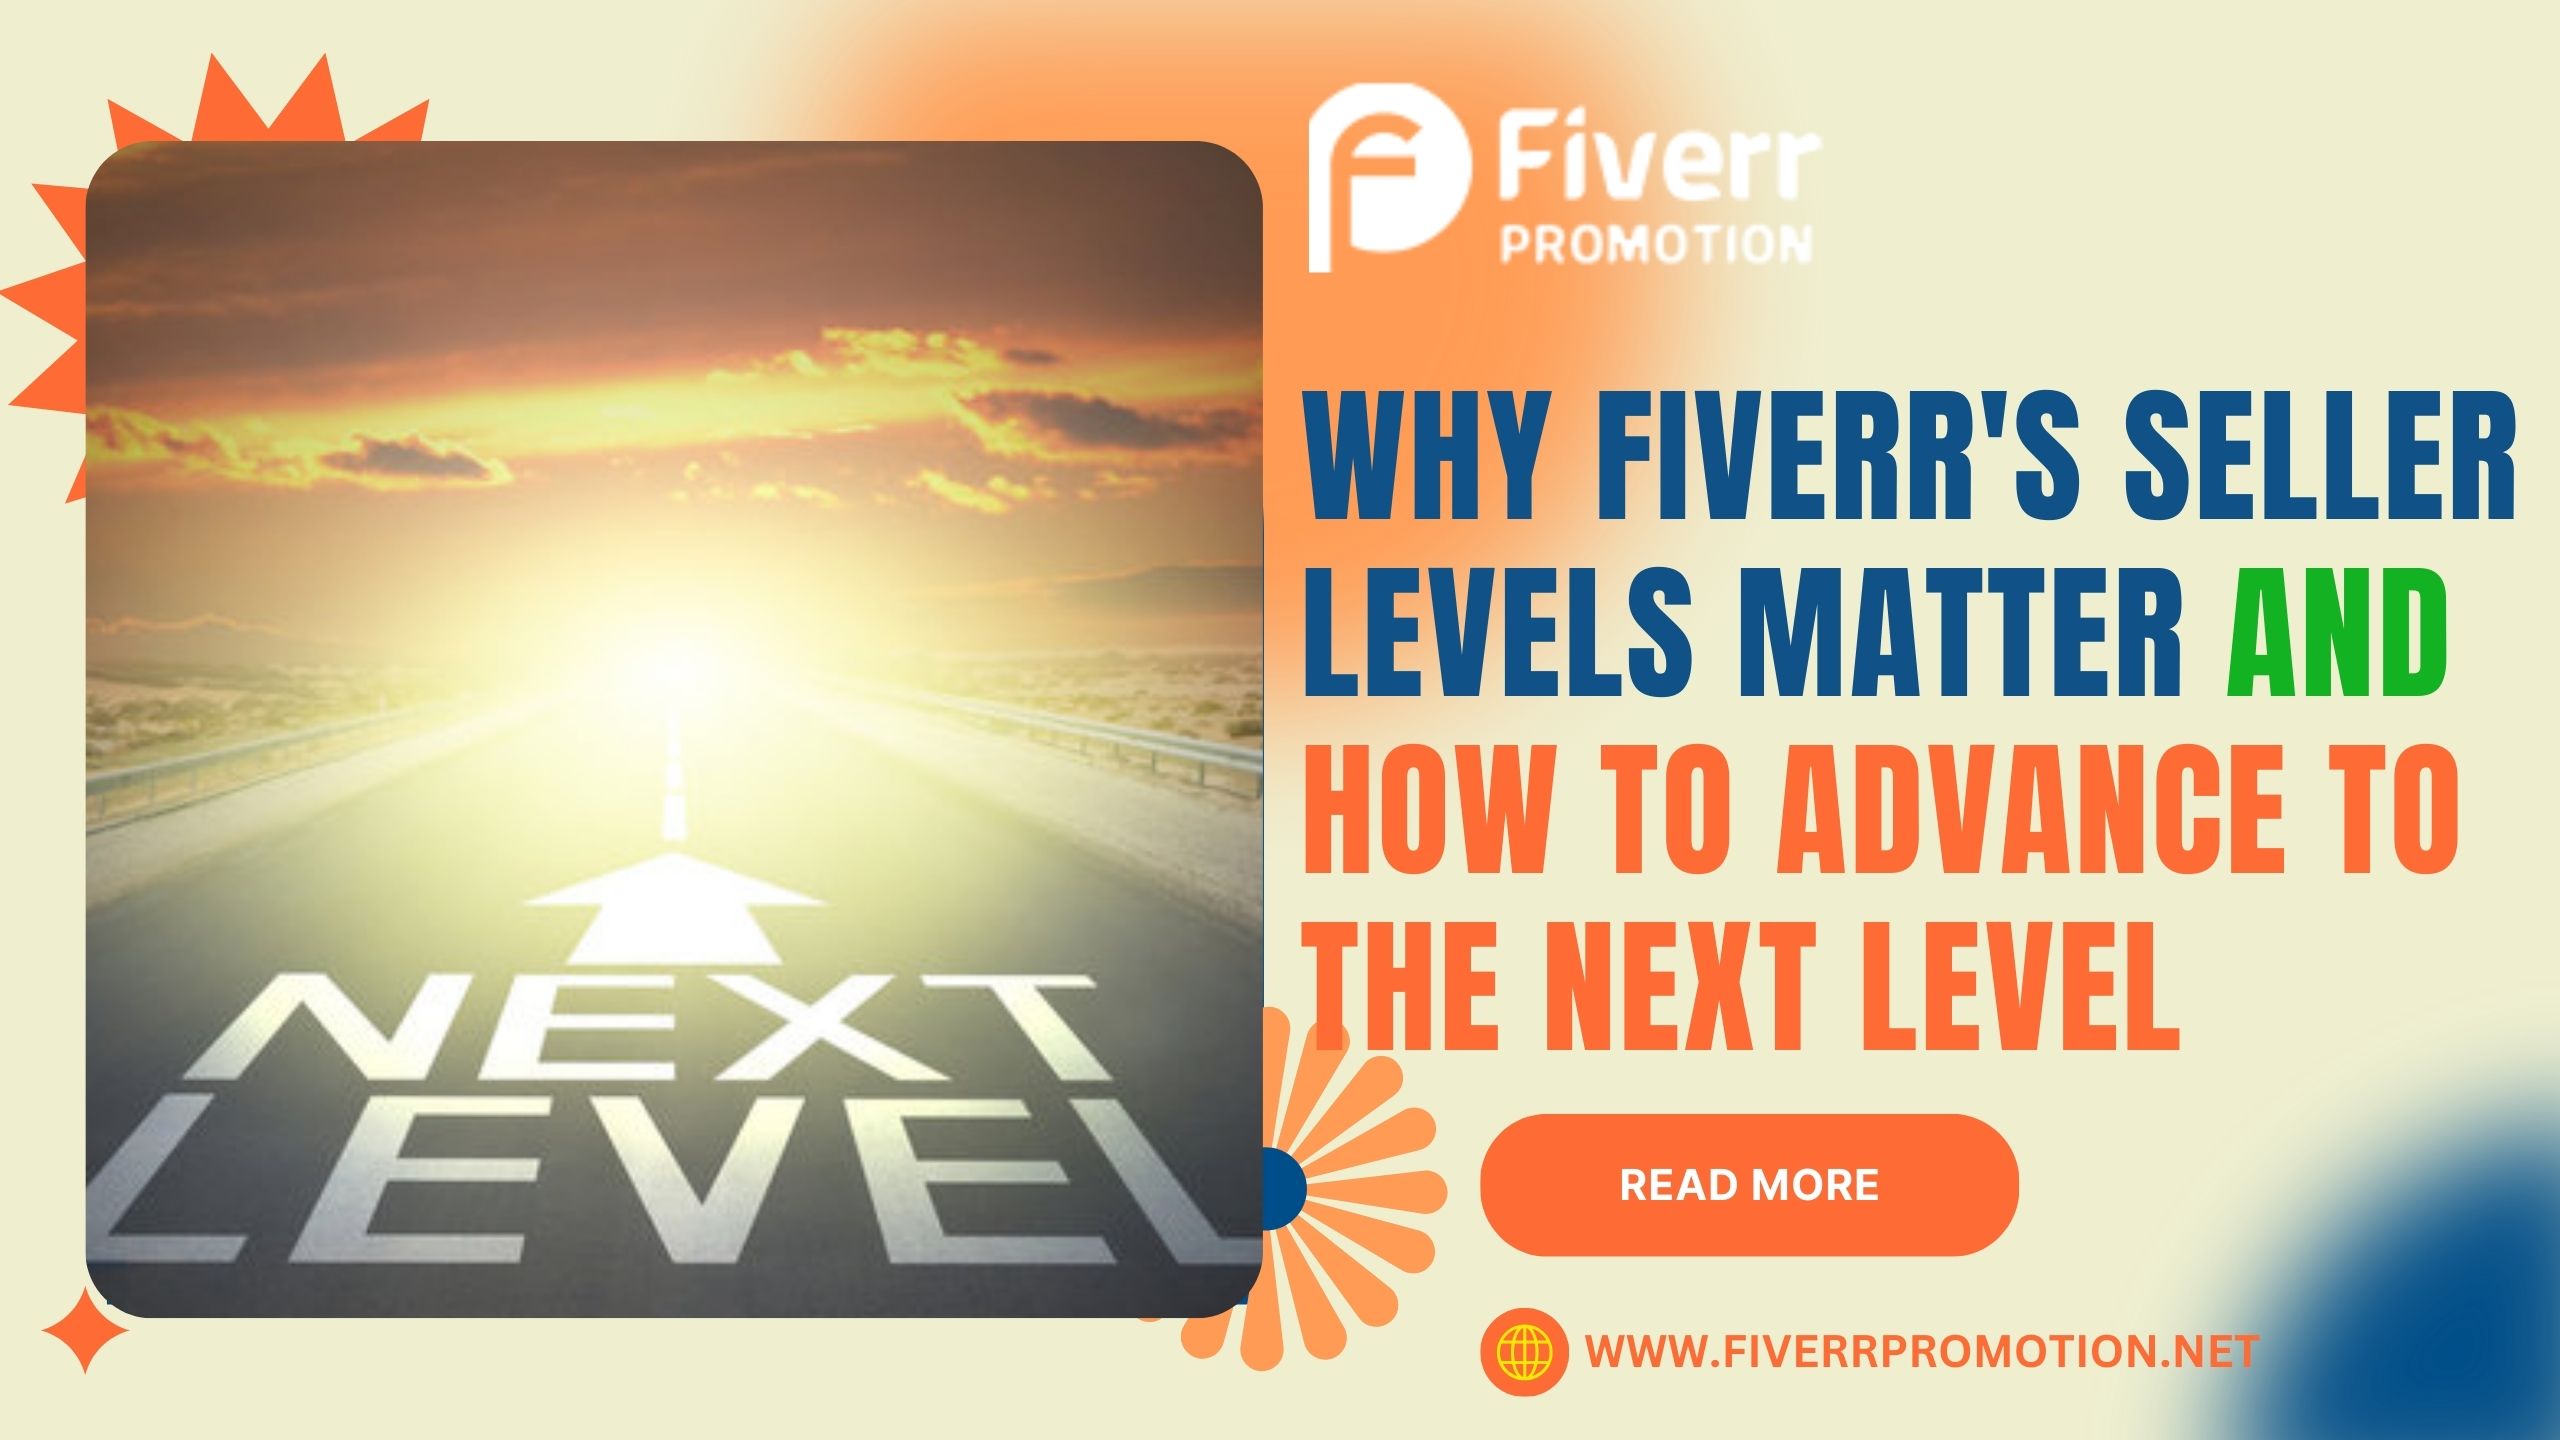 Why Fiverr’s Seller Levels Matter and How to Advance to the Next Level